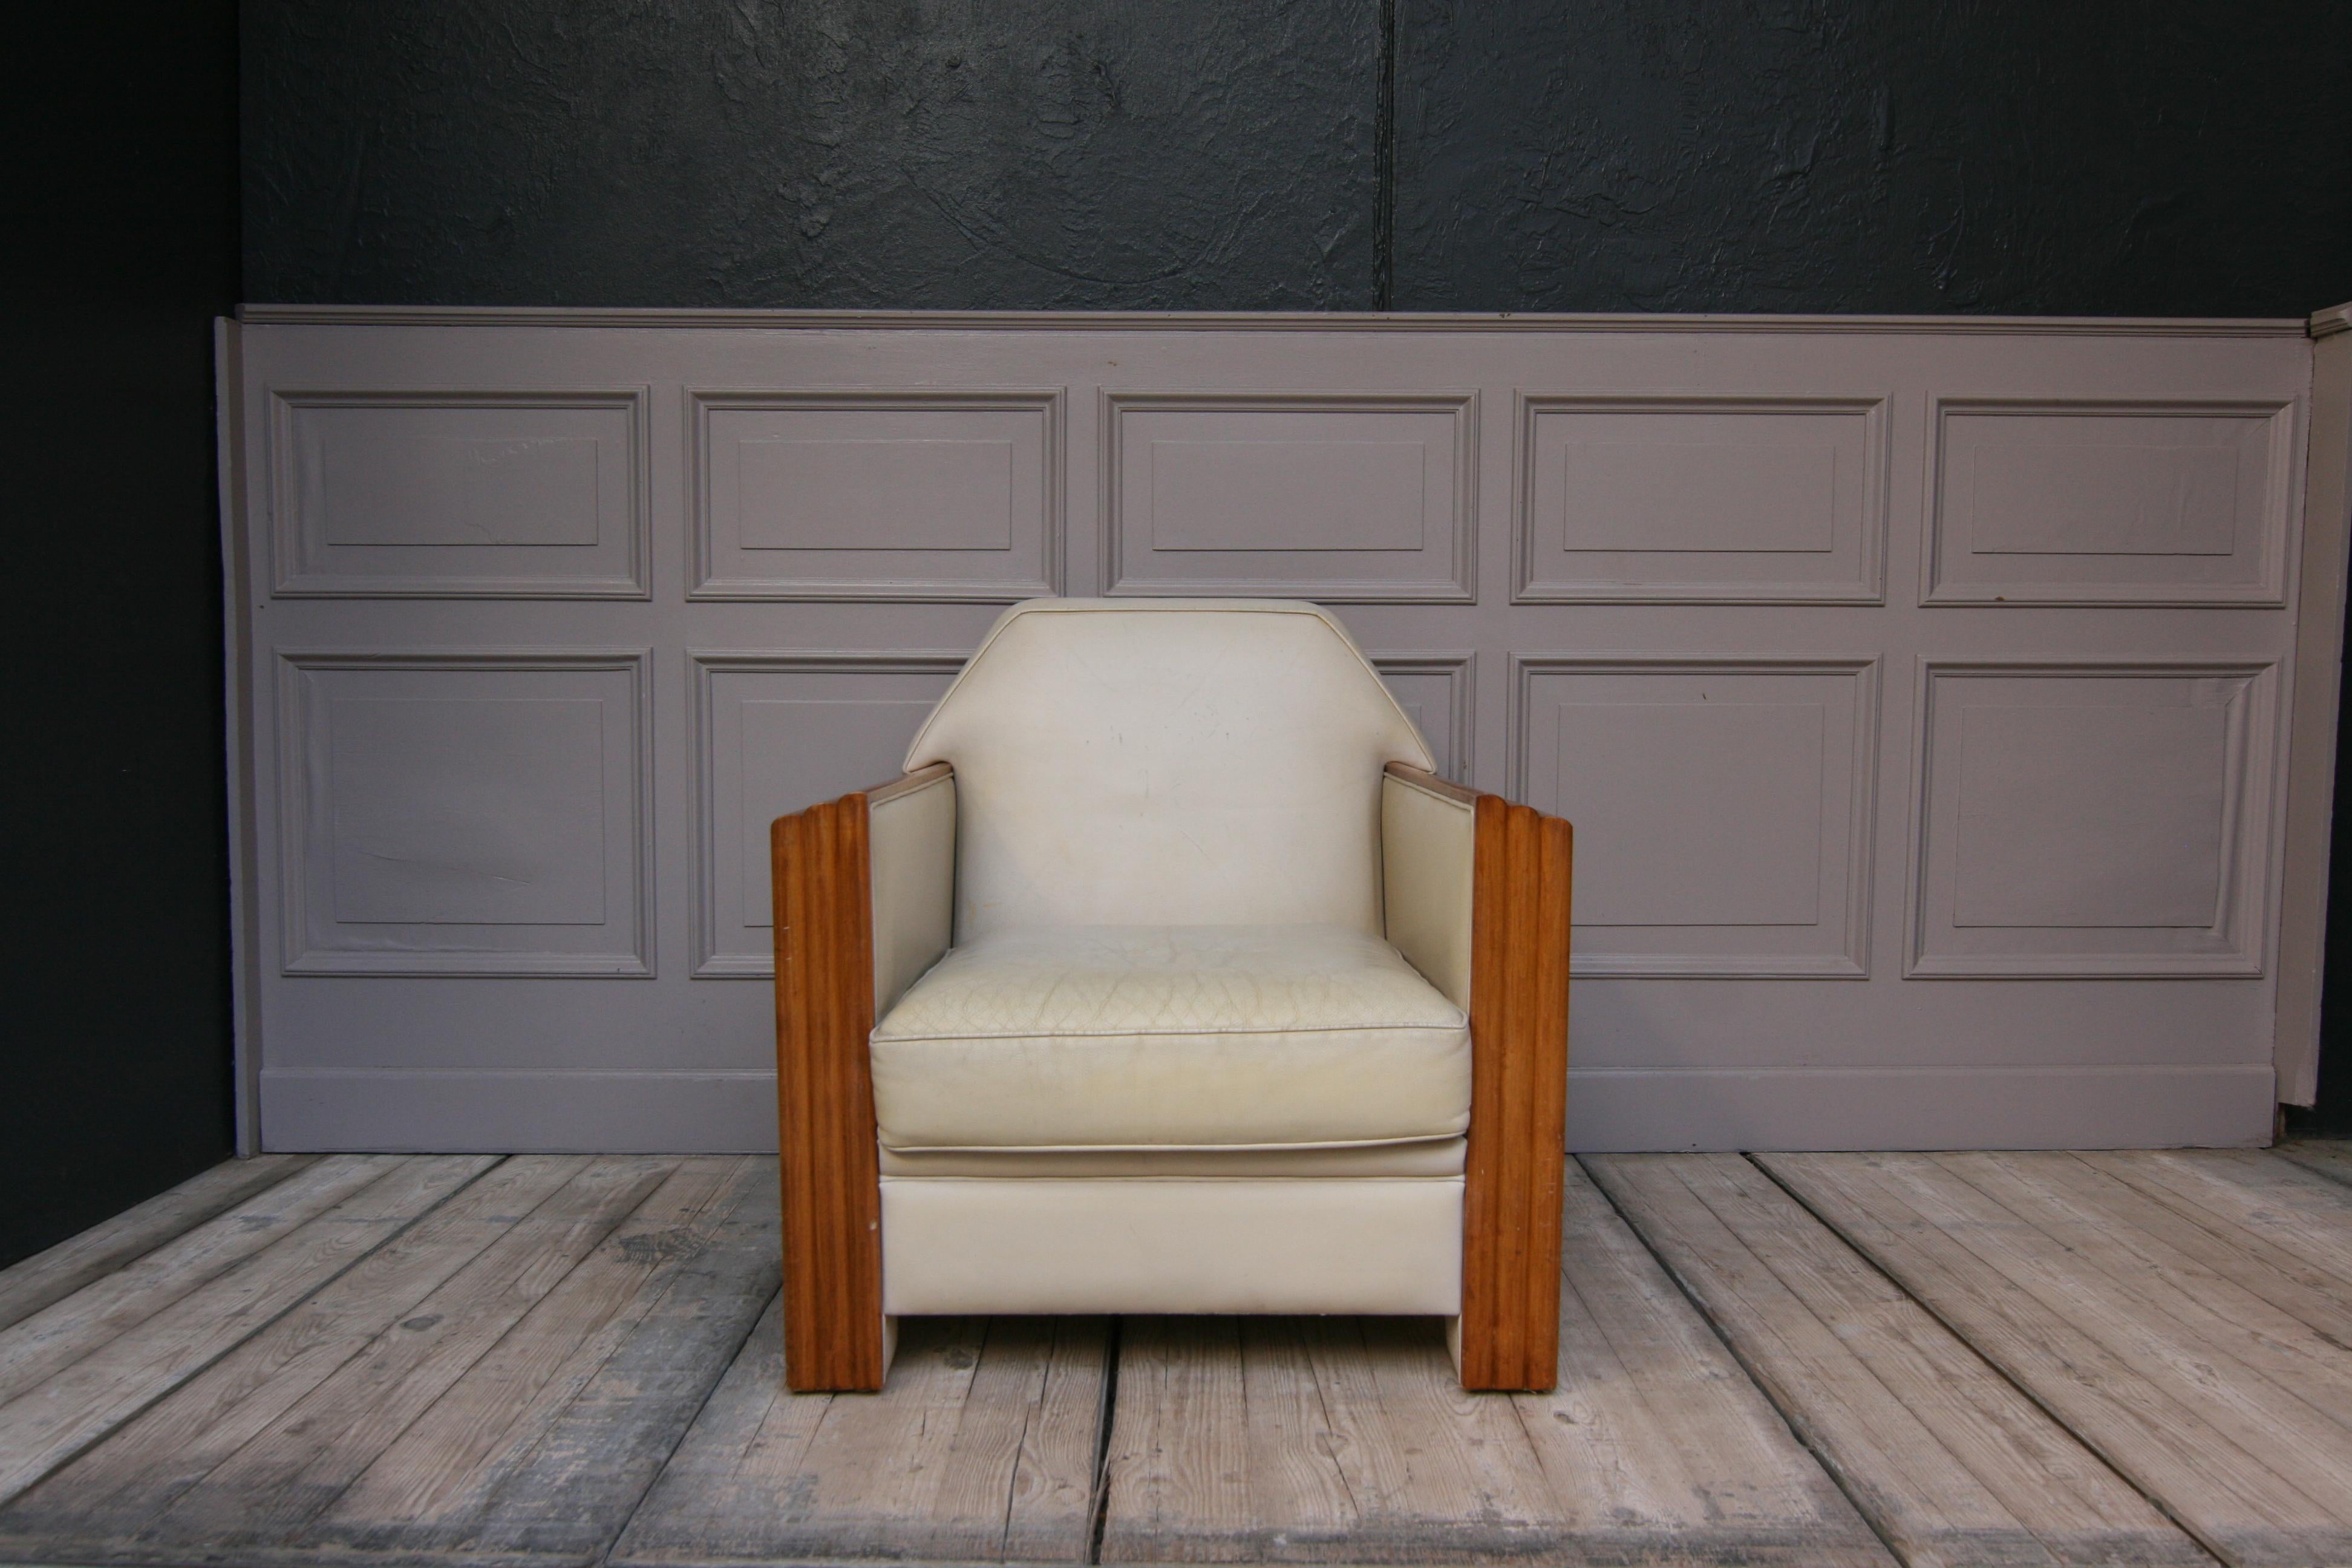 Original armchair in Art Deco style by Hugues Chevalier from Paris. Beechwood frame and leather cover.
The brand name 